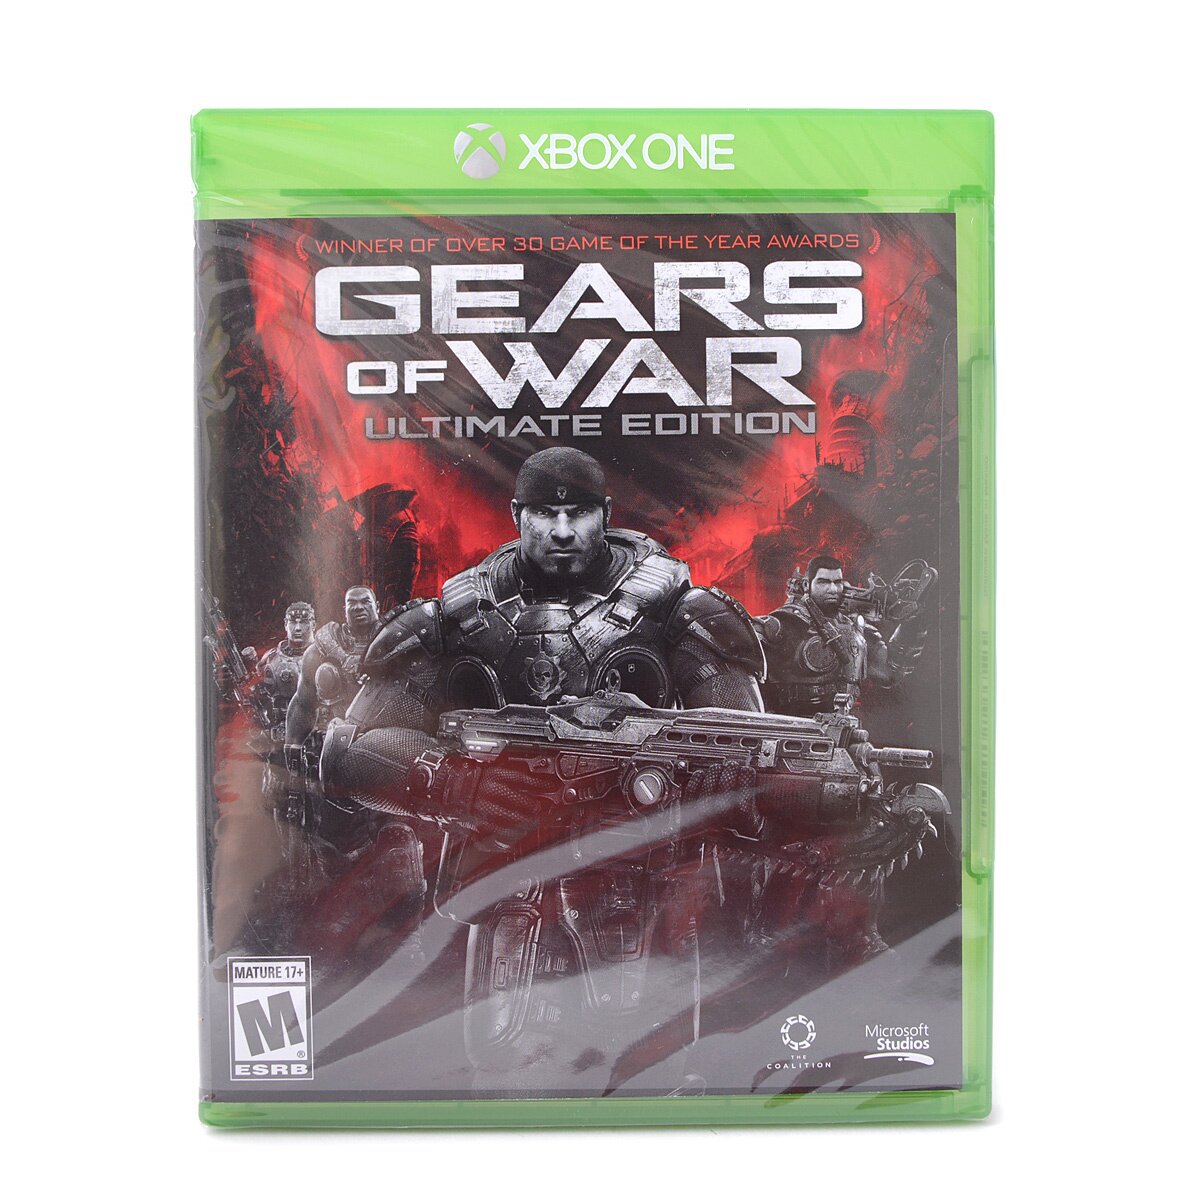 Buy Gears of War 4 Ultimate Edition (PC / Xbox One) Microsoft Store